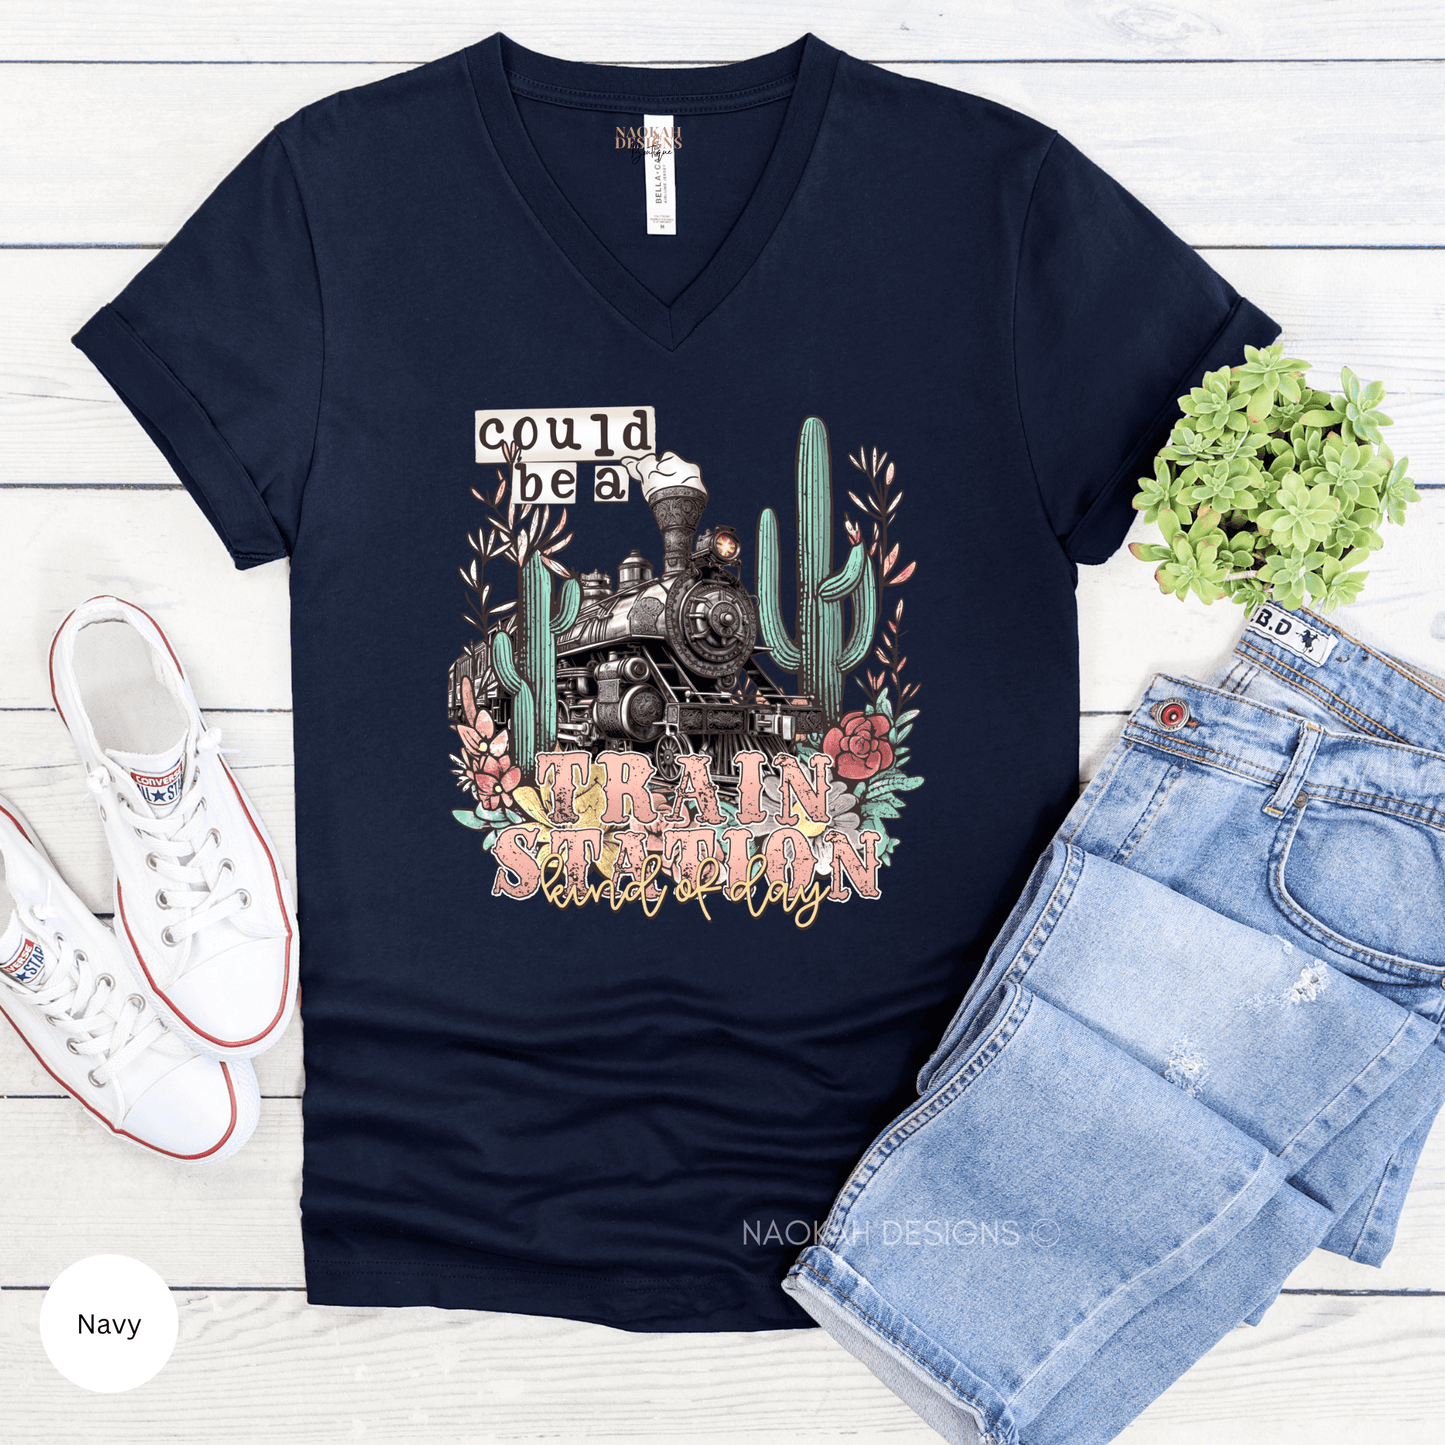 could be a train station kind of day shirt, ranch shirt, cowboy shirt, cowgirl shirt, rodeo shirt, wild west shirt